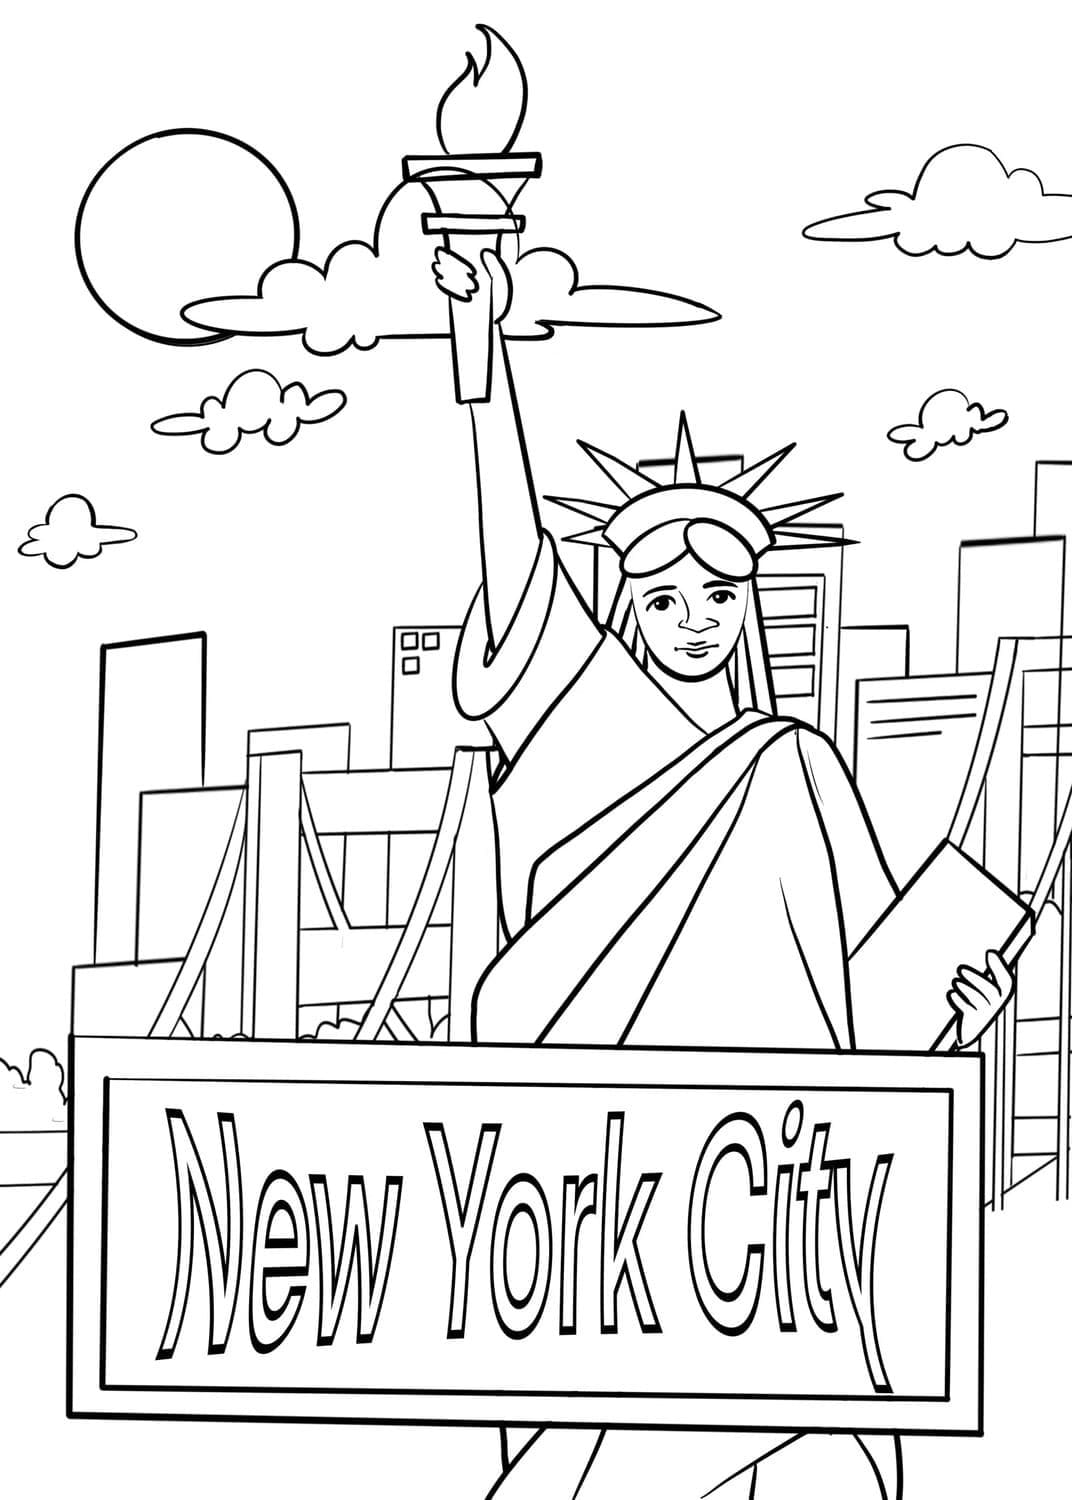 New York City Free Printable coloring page Download, Print or Color